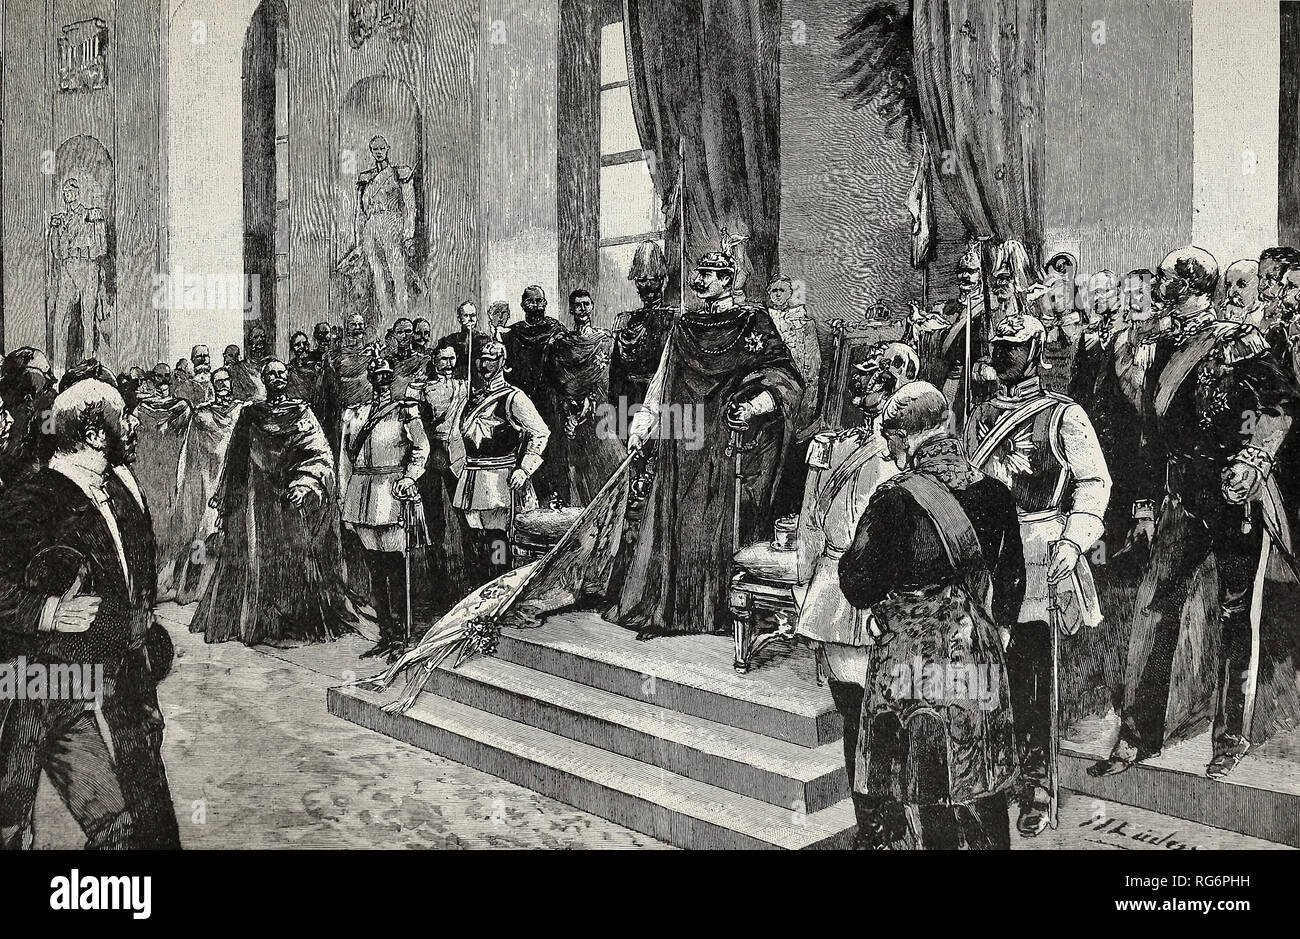 One Kingdom, One People, One God - The speech of Emperor William II proclaiming German Union Stock Photo